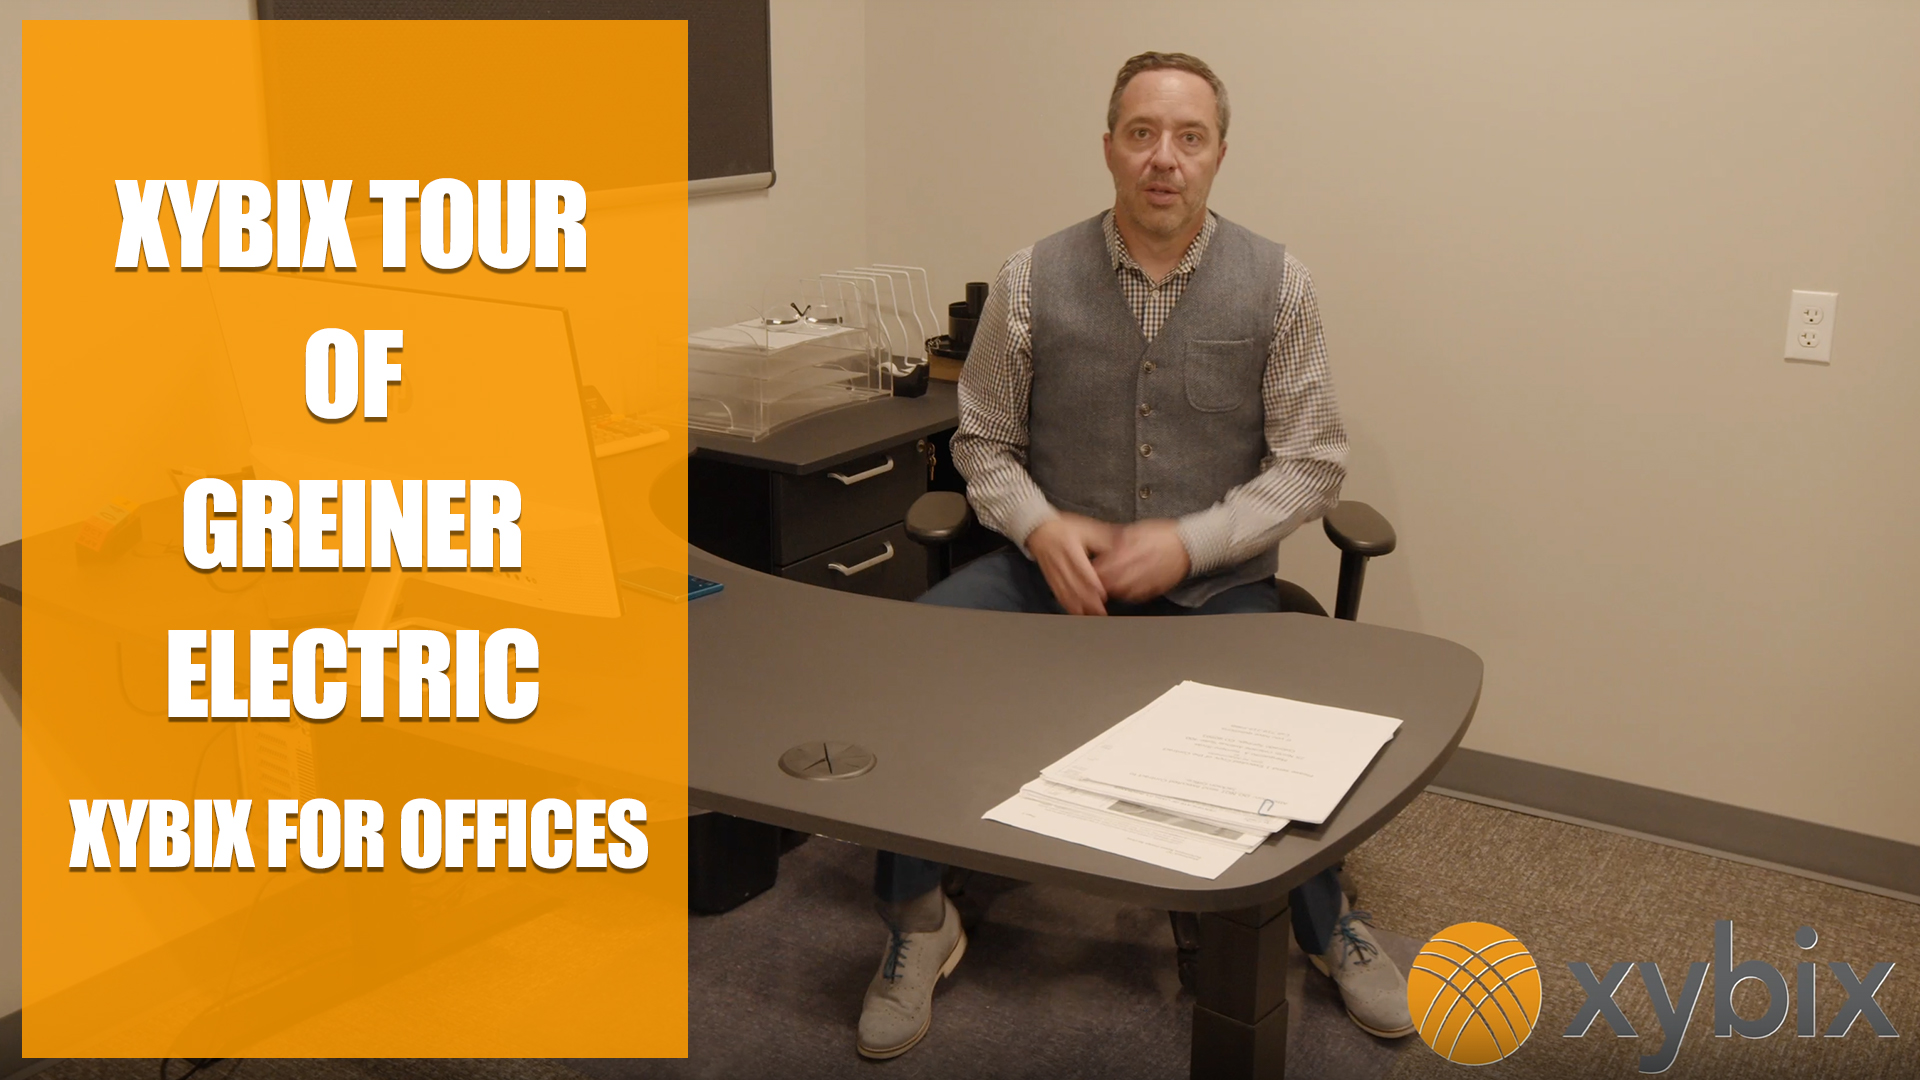 Xybix for Offices: A Tour of Greiner Electric